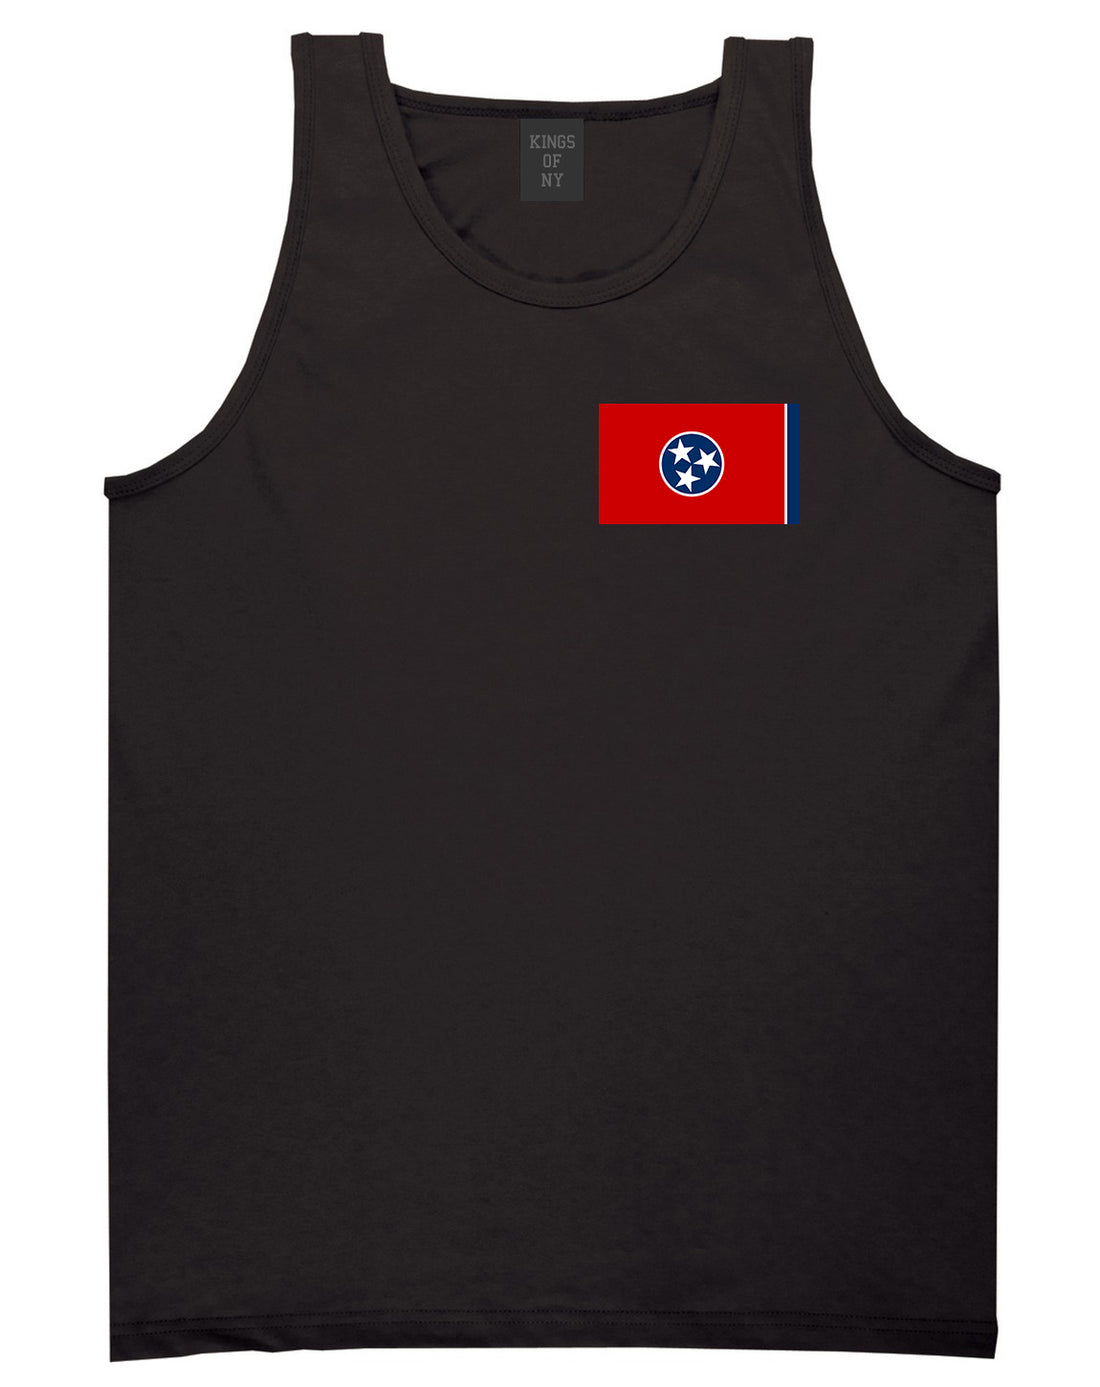 Tennessee State Flag TN Chest Mens Tank Top T-Shirt Black